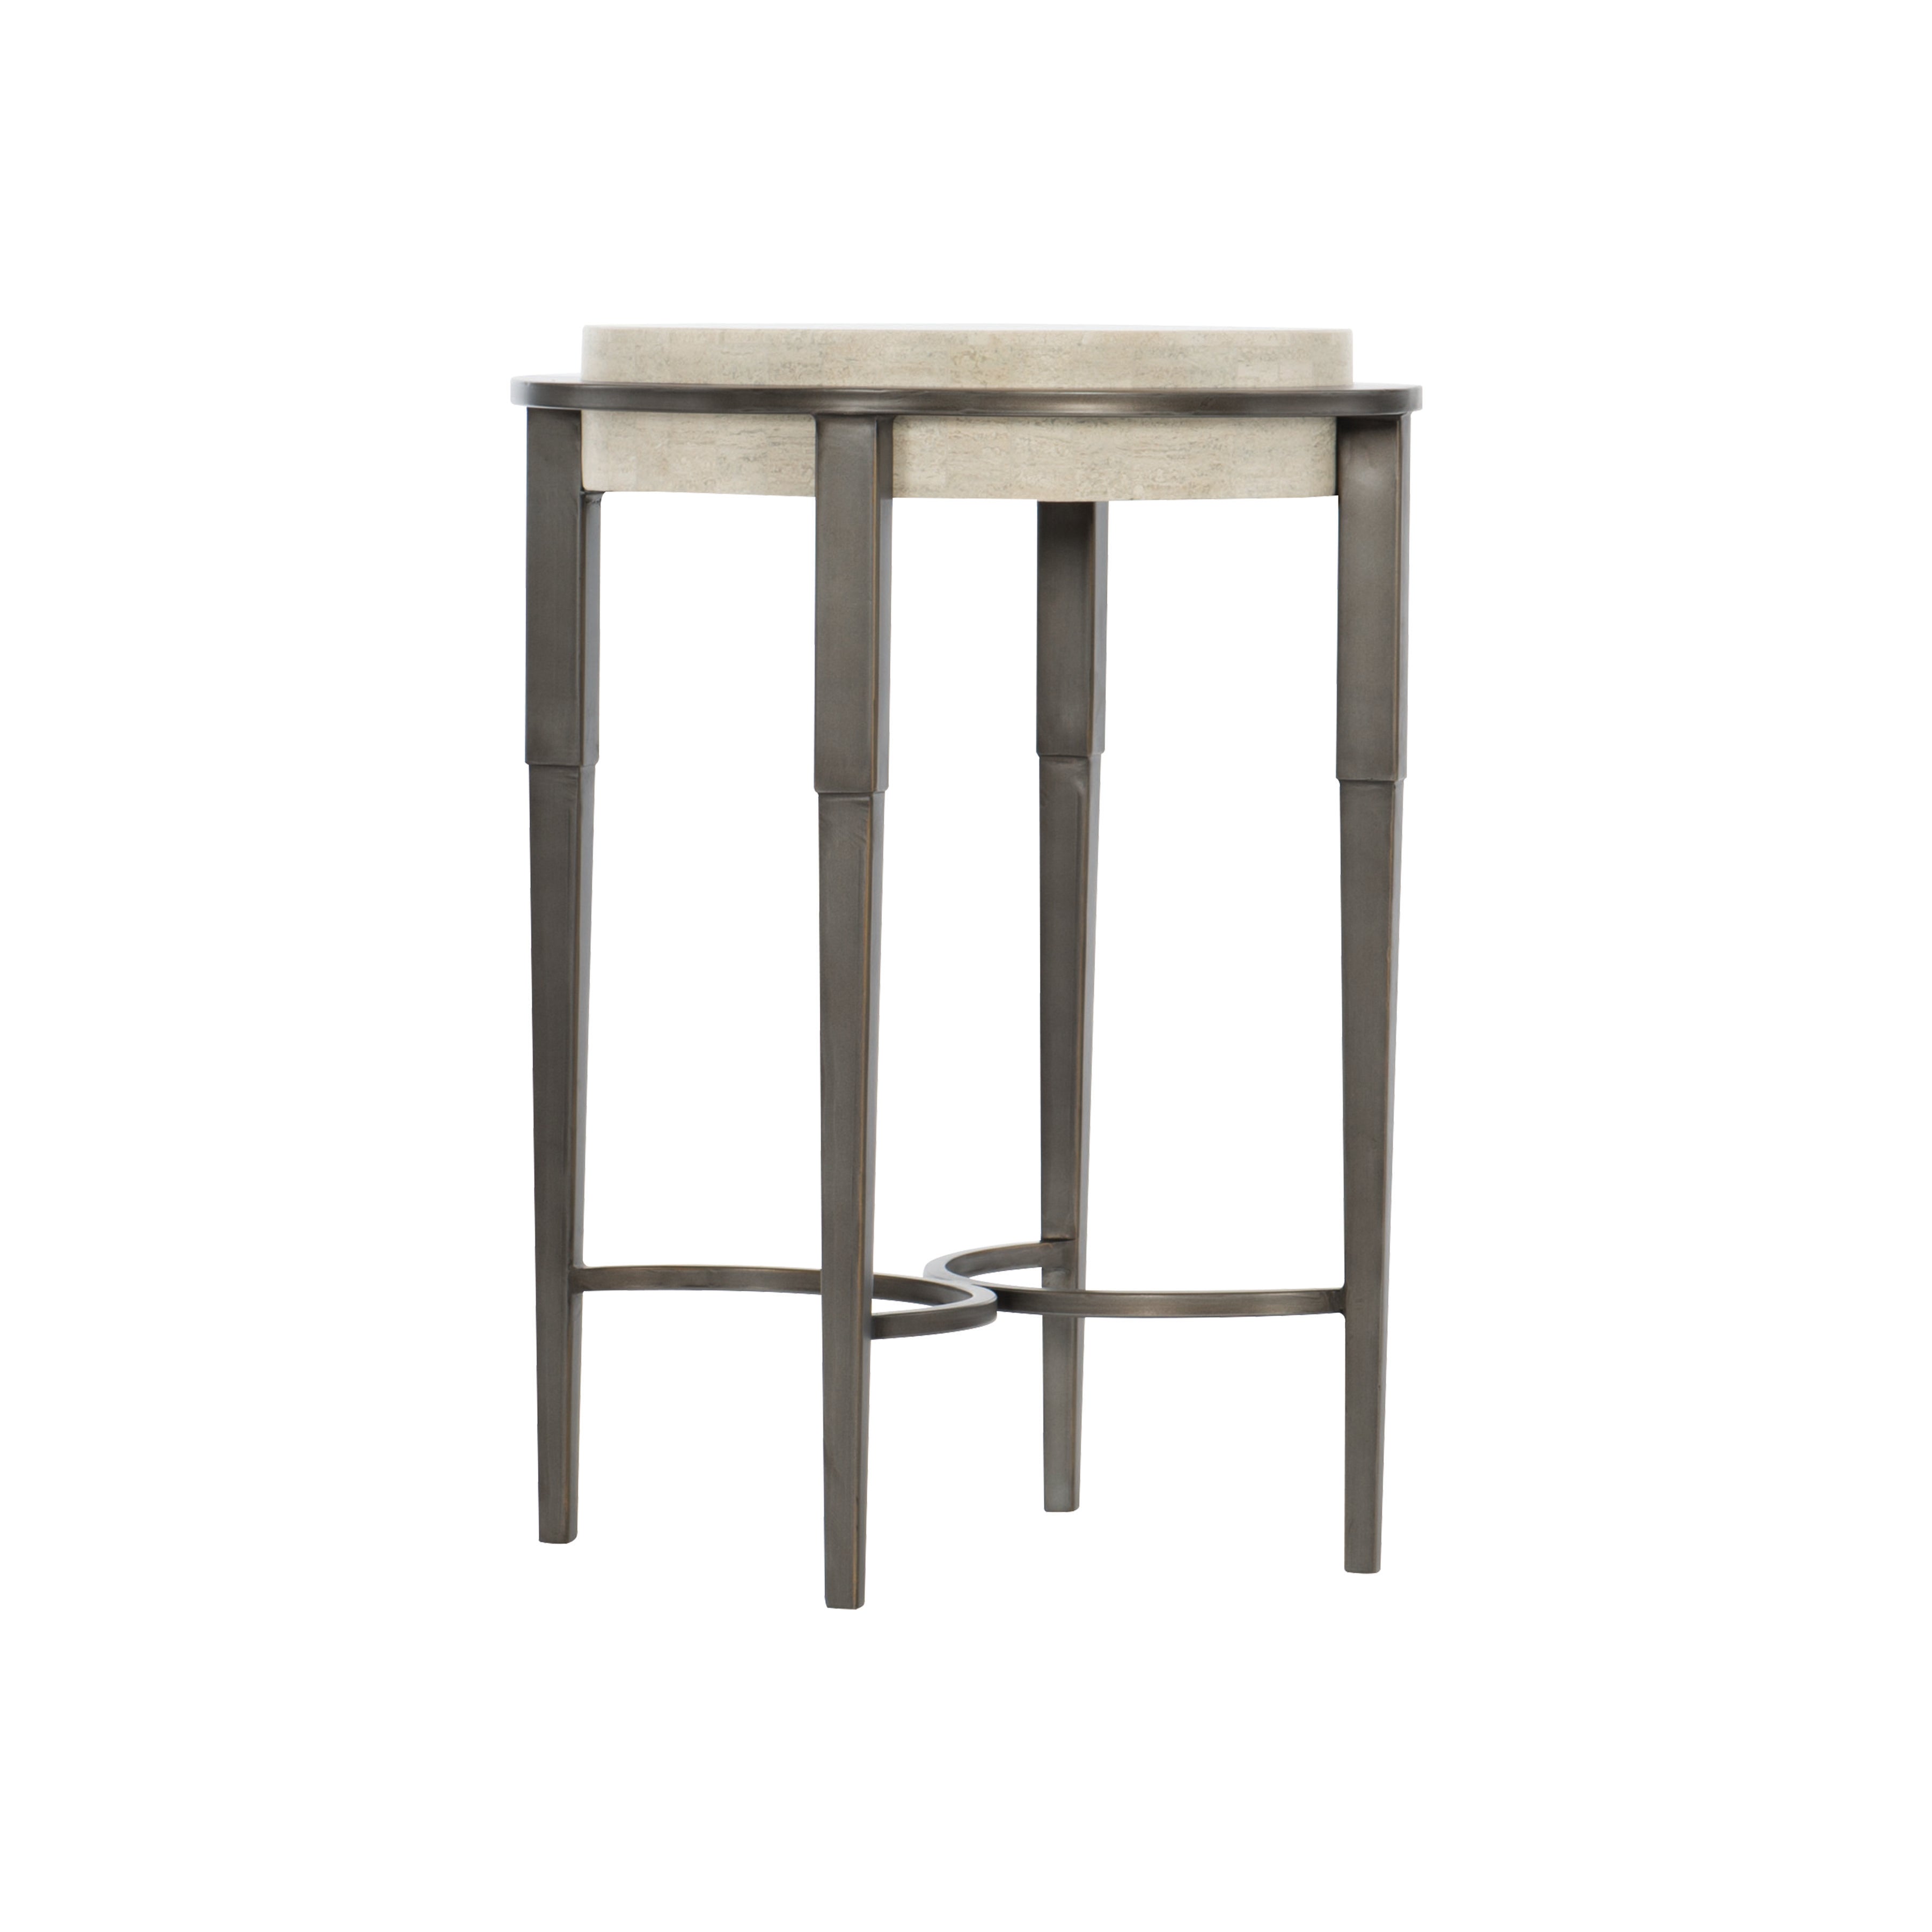 Barclay Accent Table